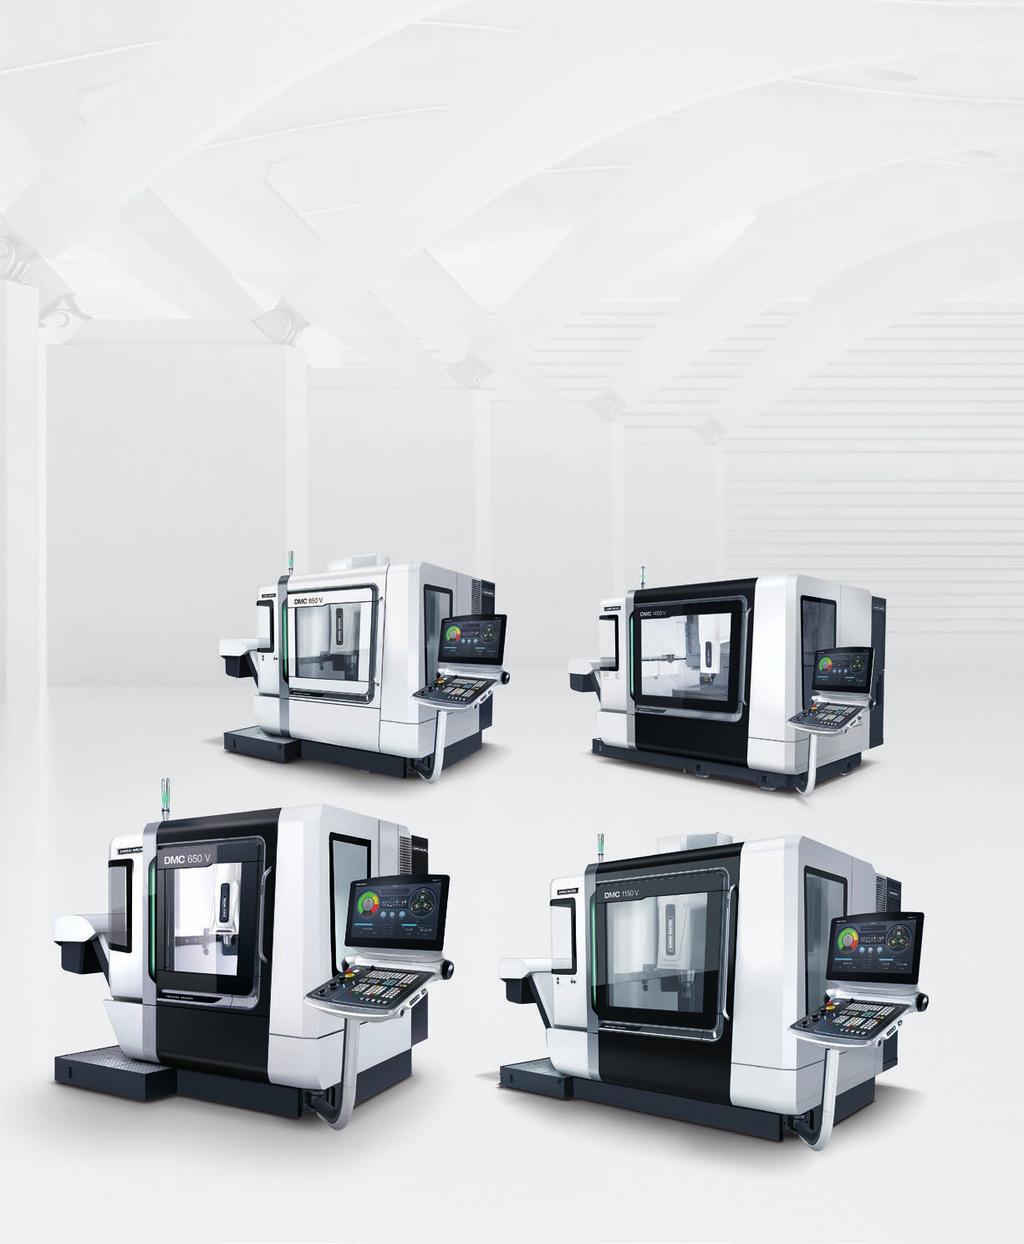 Machine and Technology Control Technology Technical Data DMC V series A new dimension in powerful vertical-spindle machining.